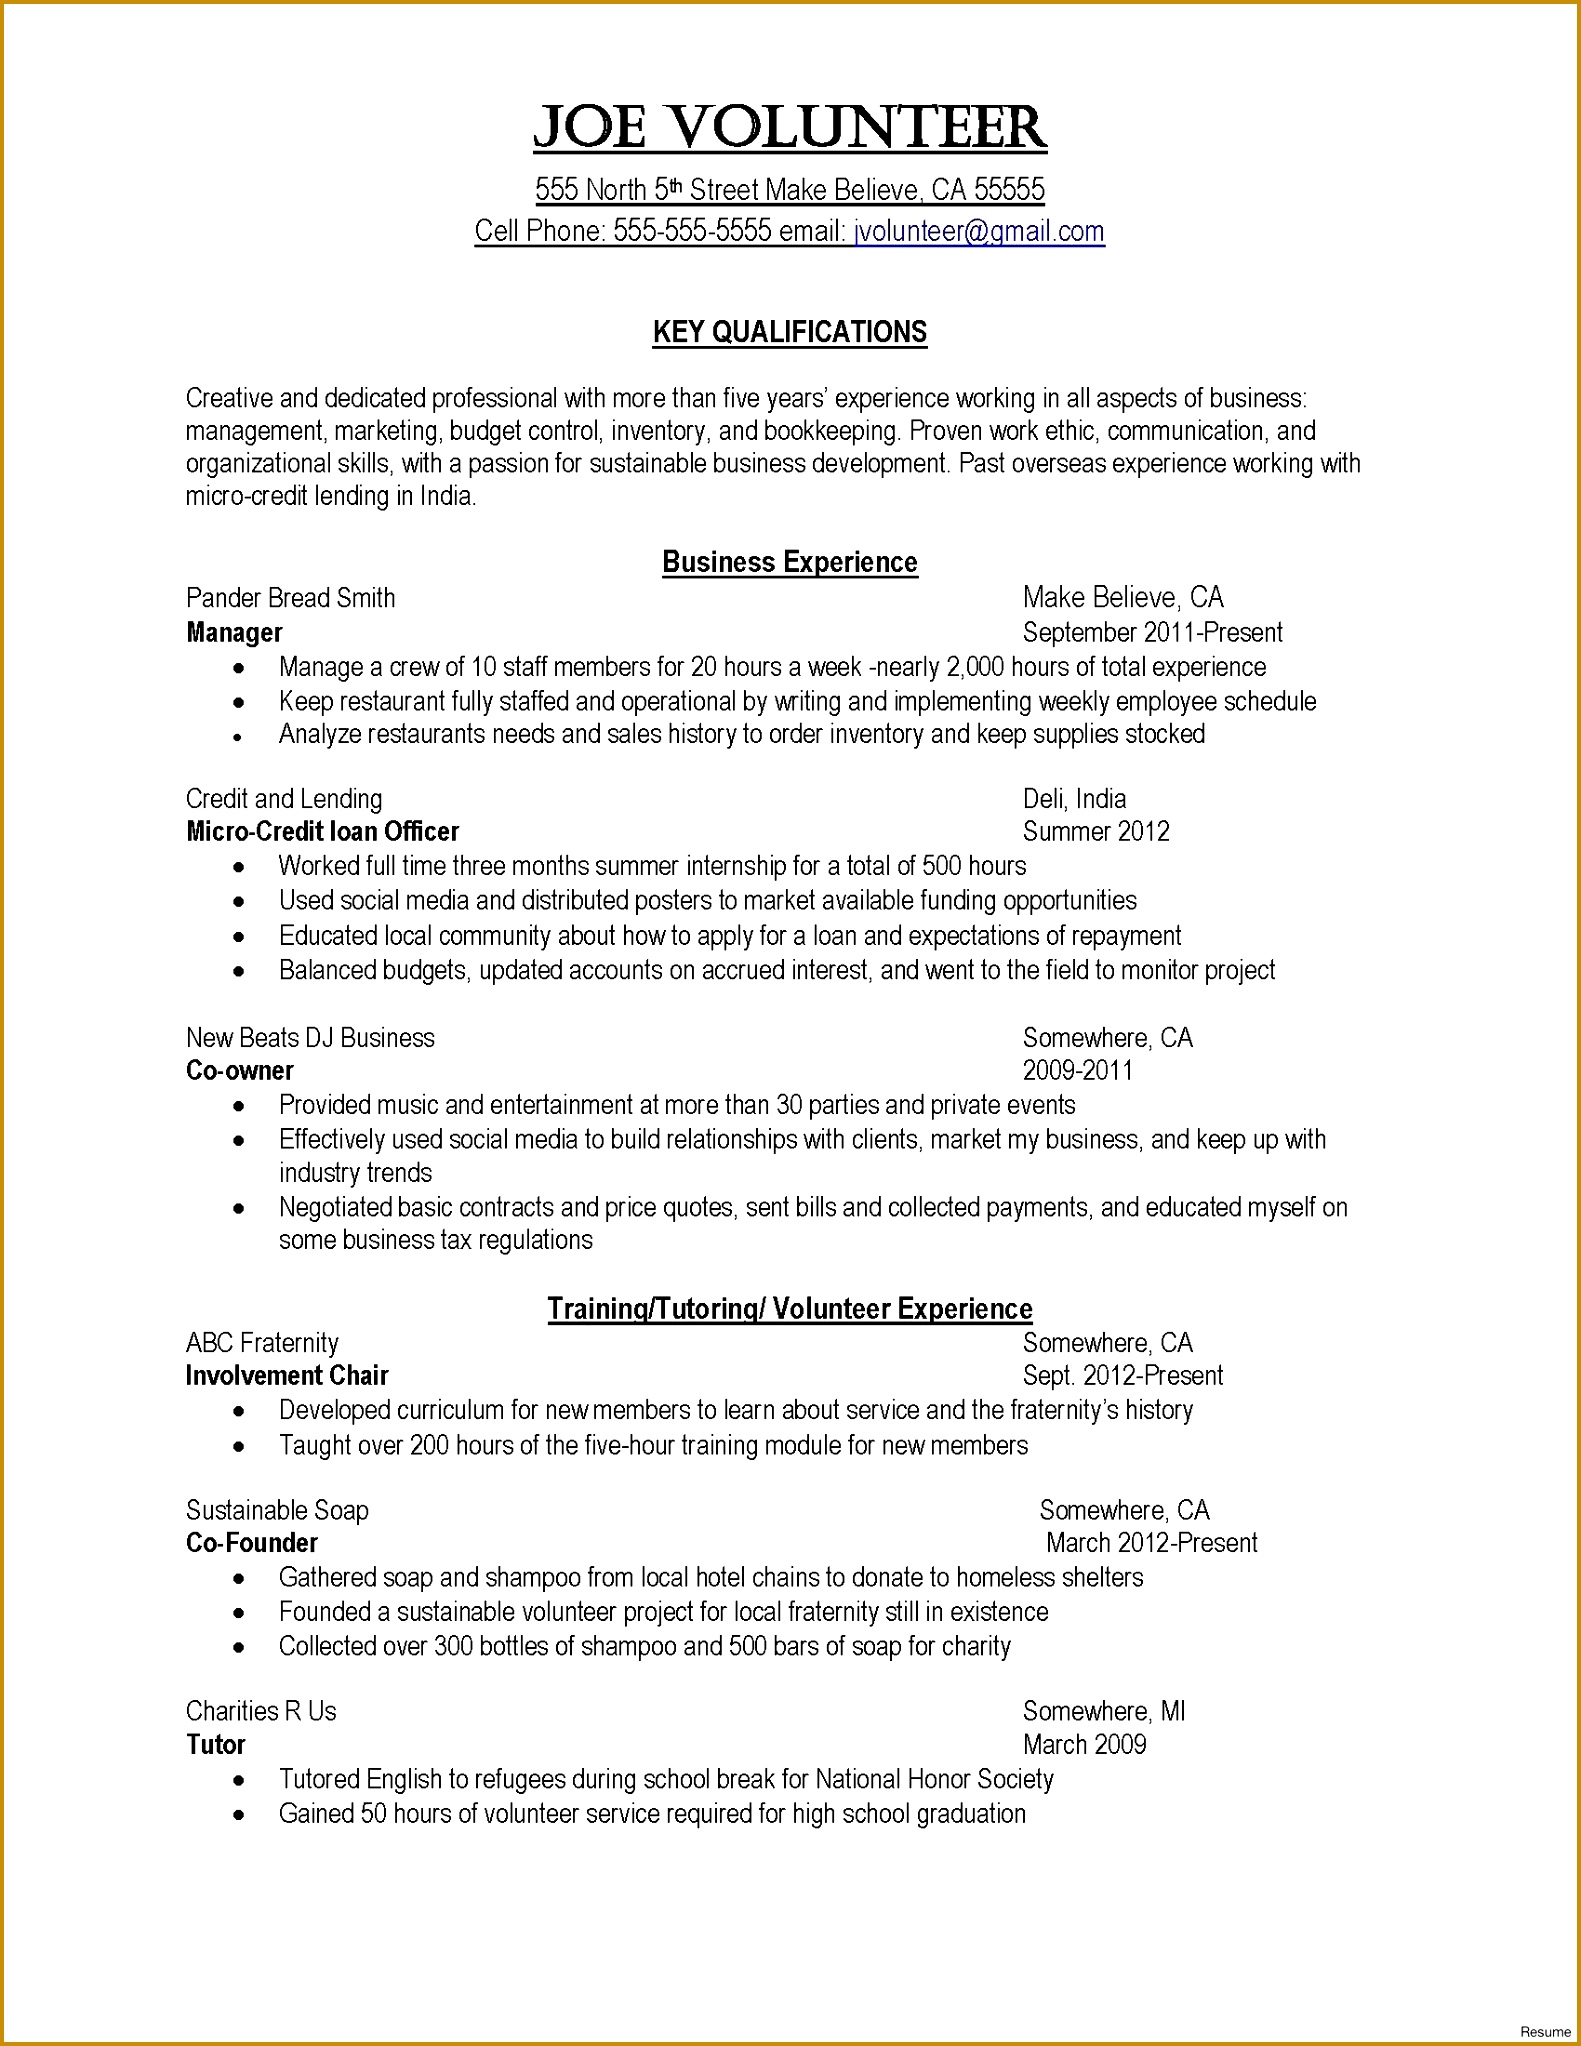 Letter Pdf format · No Work Experience Resume Template Lovely Graphic Resume Templates New Resume Puter Skills Examples Fresh Od 15812046